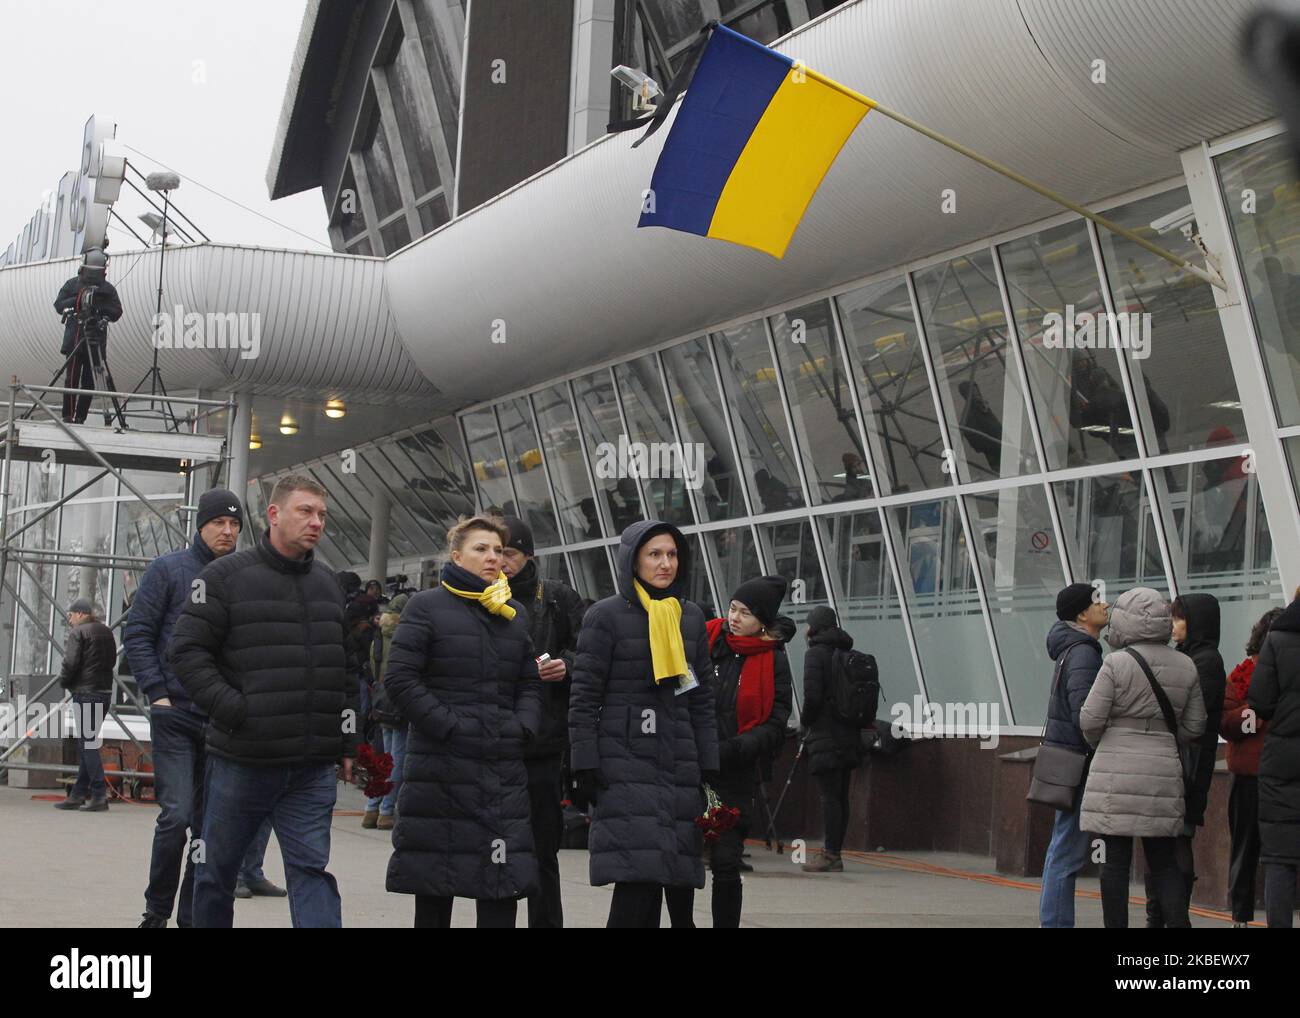 Relatives and friends arrive to a ceremony honoring the memory of victims in the crash of the flight 752 of the Ukraine International Airlines in Iran, upon arrival to the Boryspil Airport near Kiev, Ukraine, on 19 January, 2020. The bodies of Ukrainians, 9 crew members of the Ukraine International Airlines (UIA) and 2 passengers, dead the plane crash in Iran, were handed over from Iran to Ukraine. (Photo by STR/NurPhoto) Stock Photo